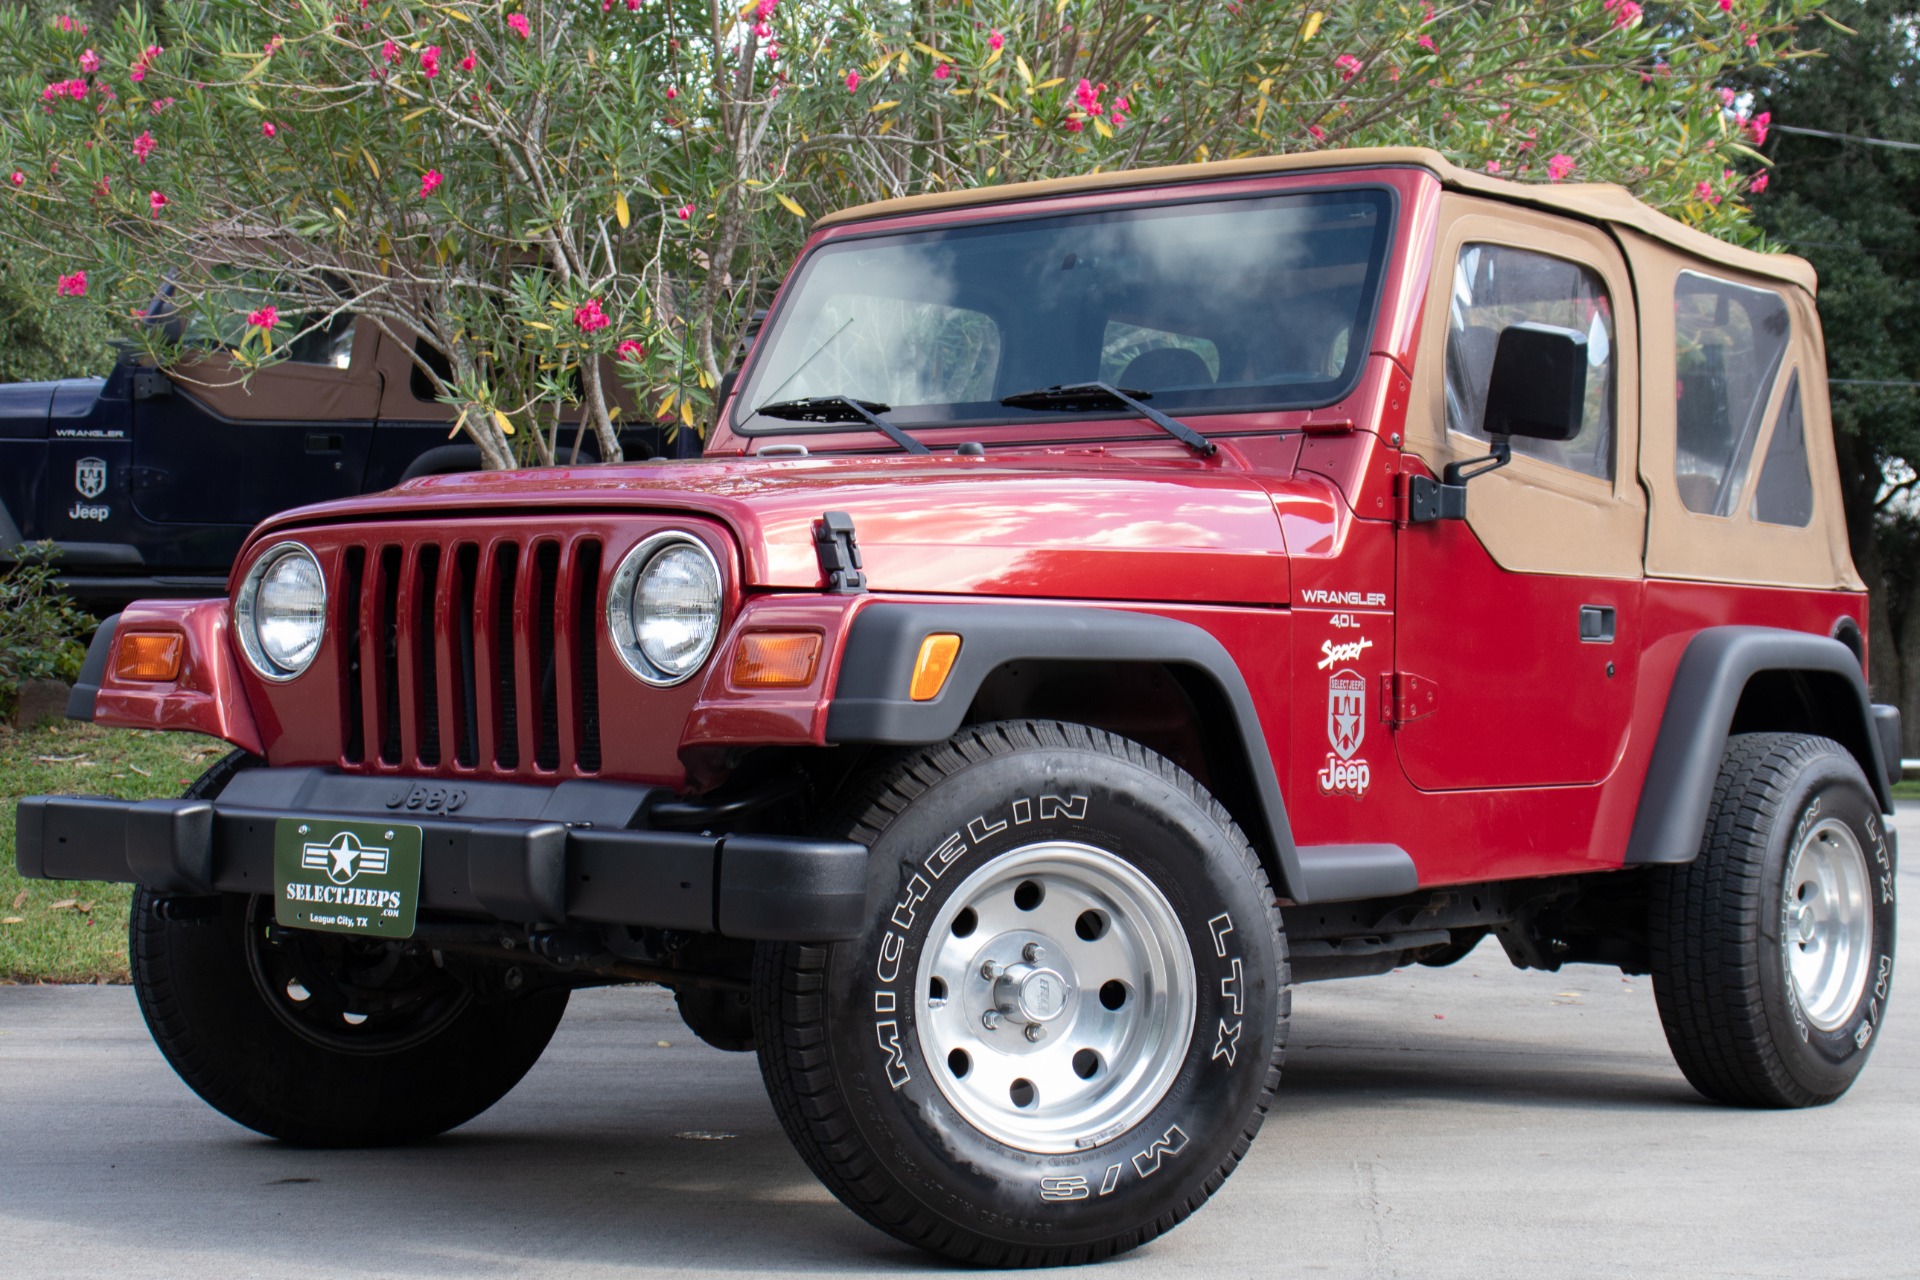 Used 1998 Jeep Wrangler Sport For Sale ($15,995) | Select Jeeps Inc. Stock  #799093